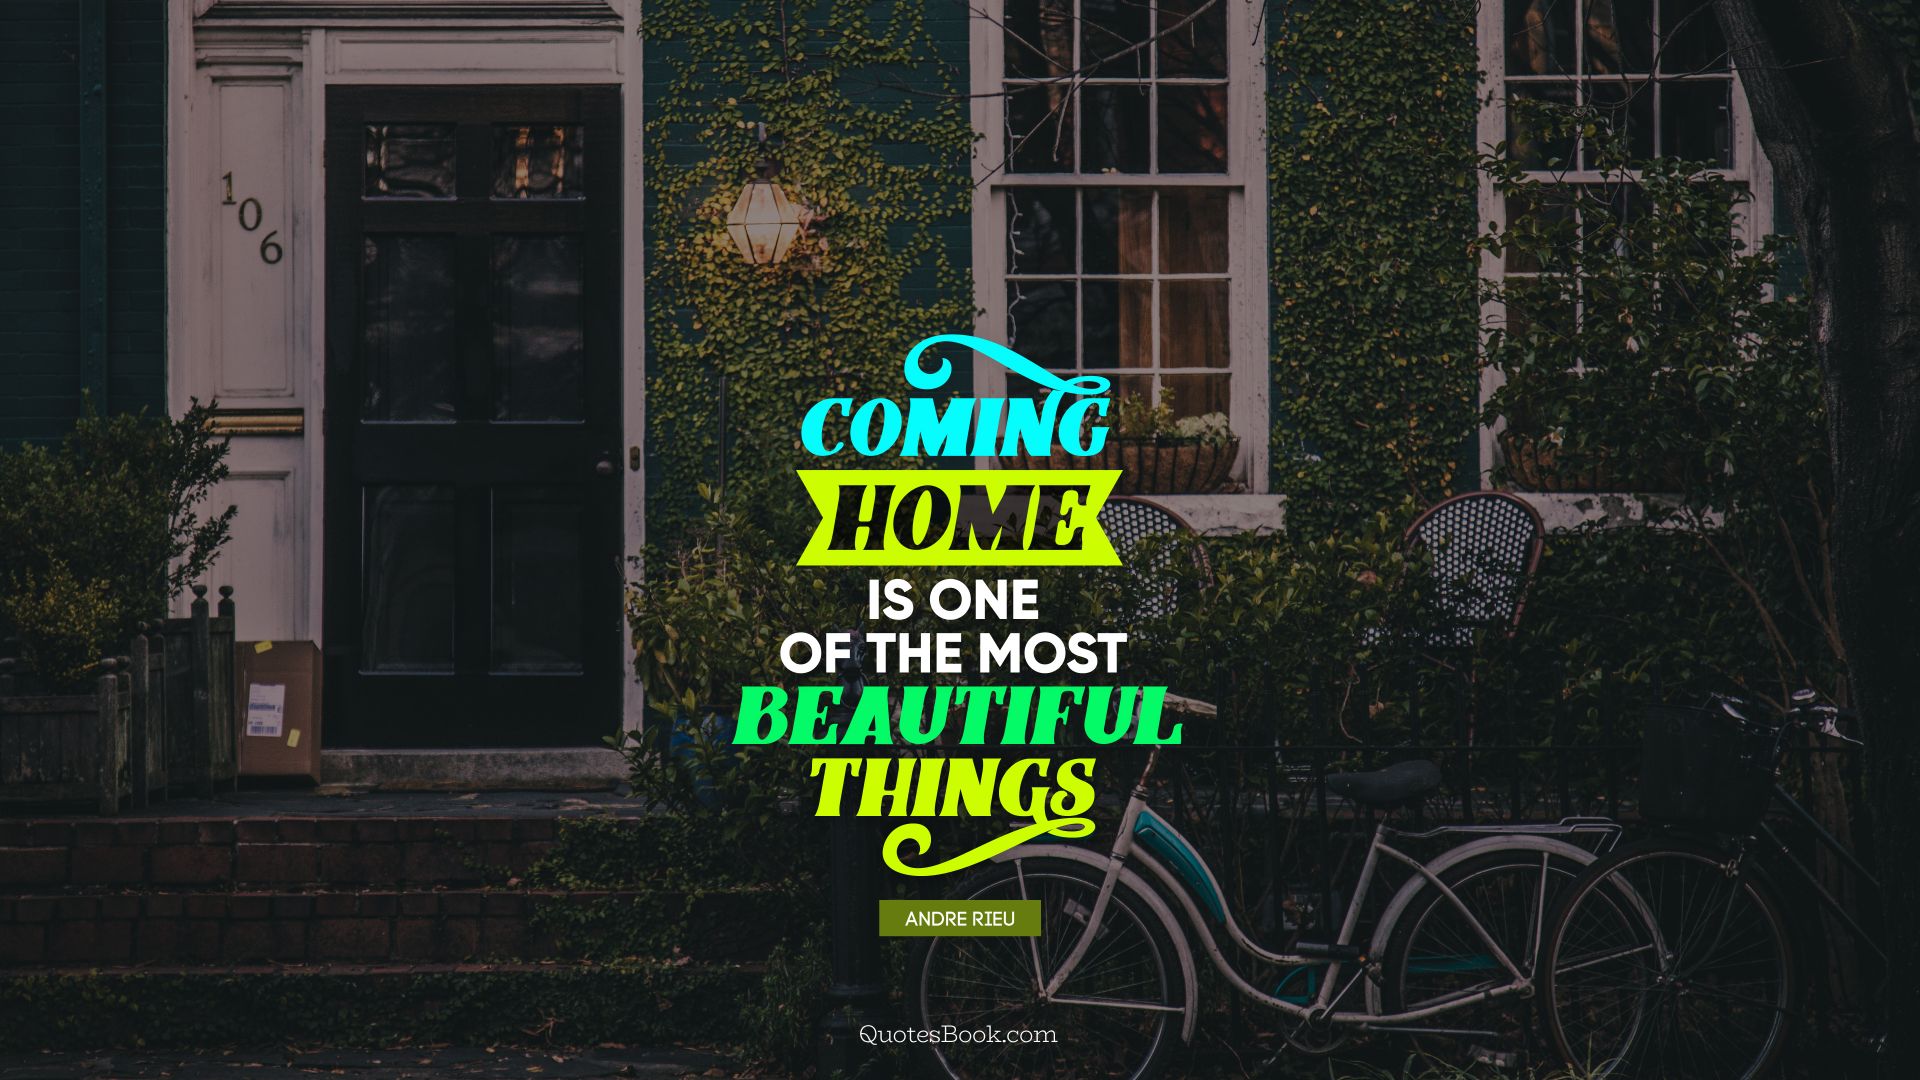 Coming home is one of the most beautiful things. - Quote by Andre Rieu